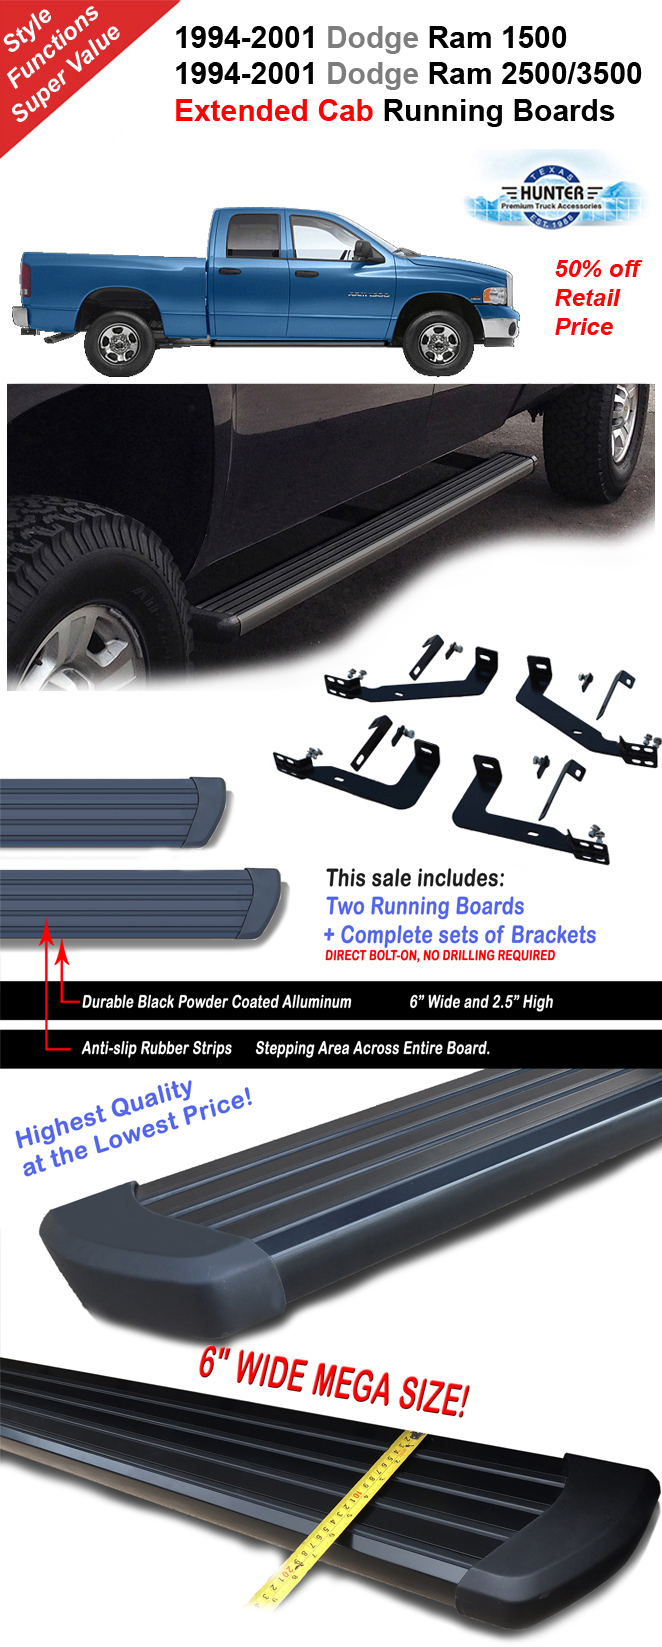 1994-2001 Dodge Ram 1500/2500/3500 Ext Cab 6" Running Boards in Coated Black | eBay 2001 Dodge Ram 2500 Extended Cab Running Boards